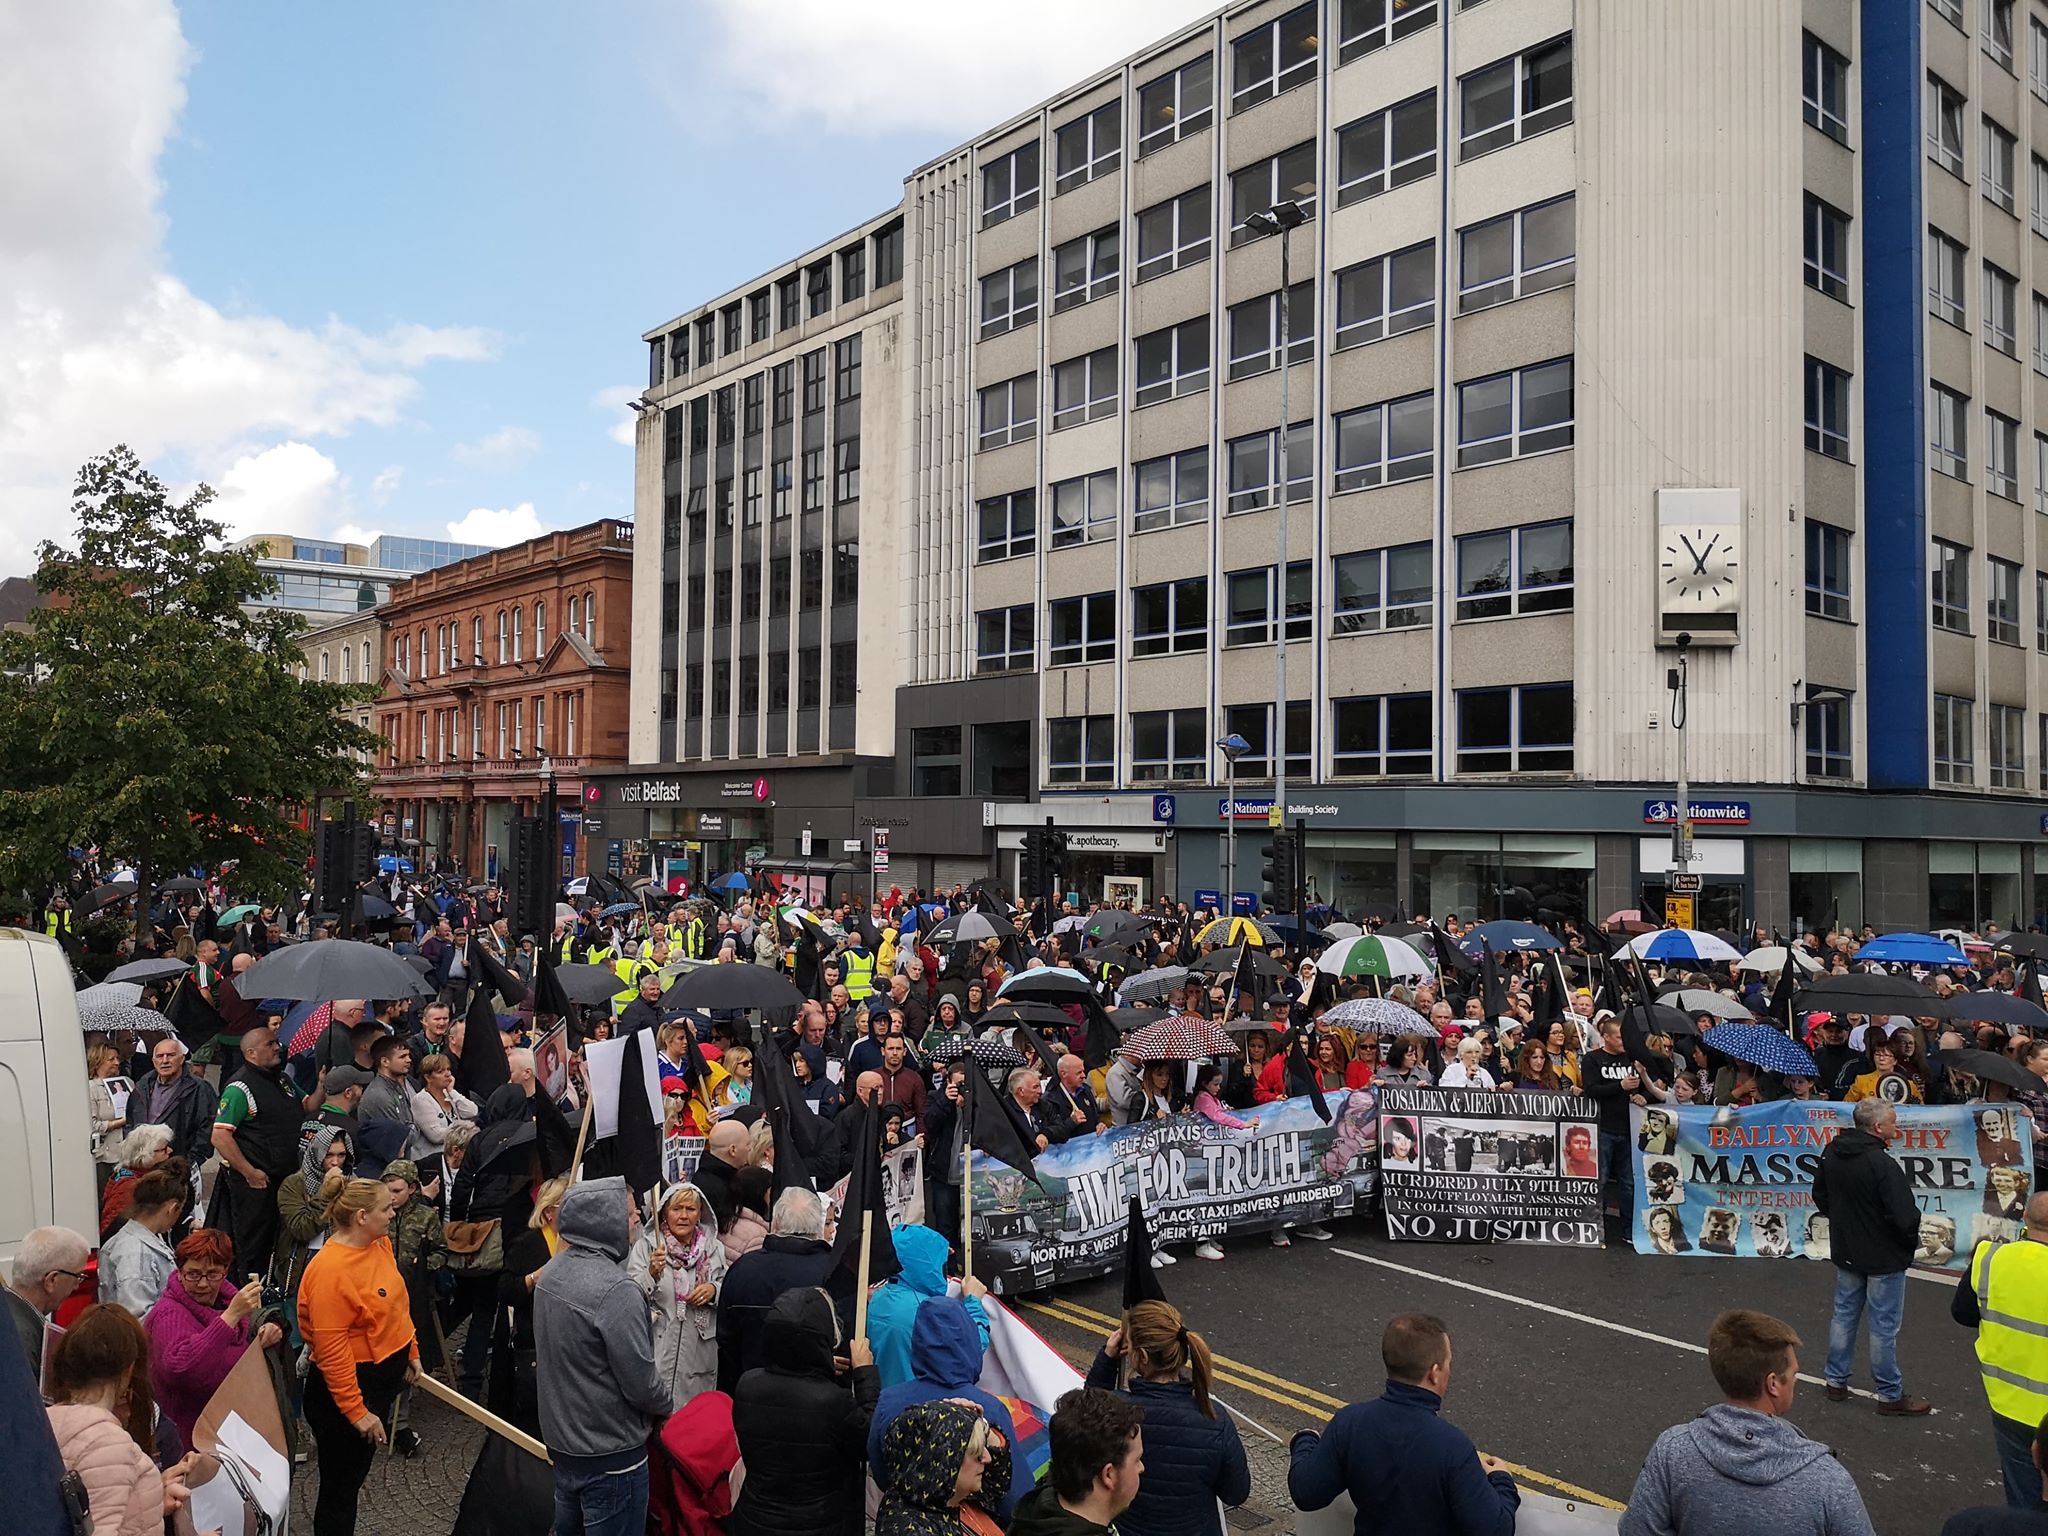 The Time for Truth March arrives at Belfast City Hall yesterday, Sunday\n